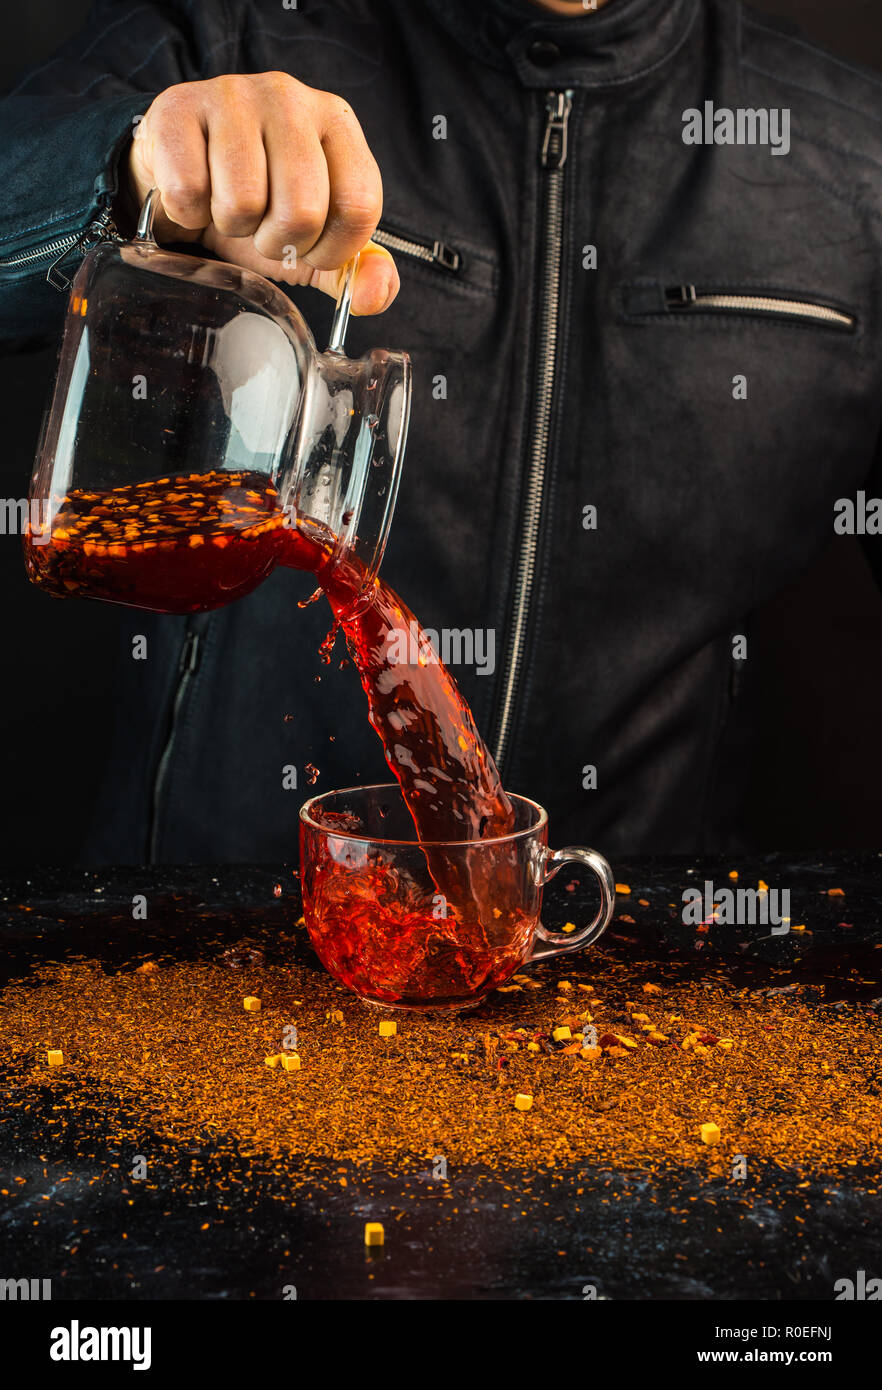 a man pours a drink from a jug into a glass cup, you can see drops and a liquid splash Stock Photo